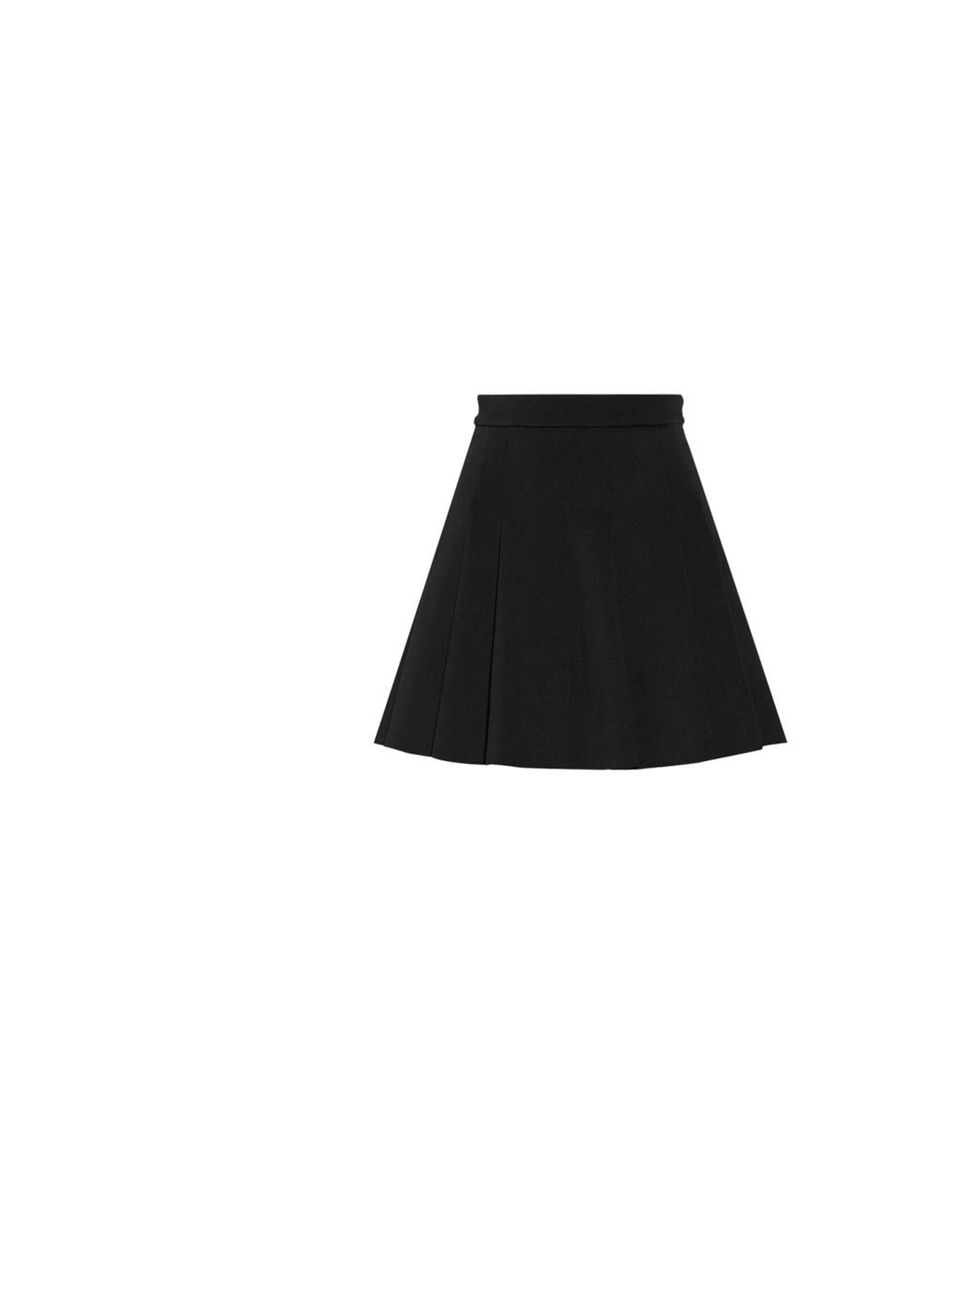 <p>Show off this neoprene skirt to the max with bare legs, ankle boots and a cropped jacket, T by Alexander Wang, £190, at <a href="http://www.net-a-porter.com/intl/product/382963?cm_mmc=LinkshareUK-_-0RpXOIXA500-_-ProductFeed-_-T_by_Alexander_Wang&amp;si